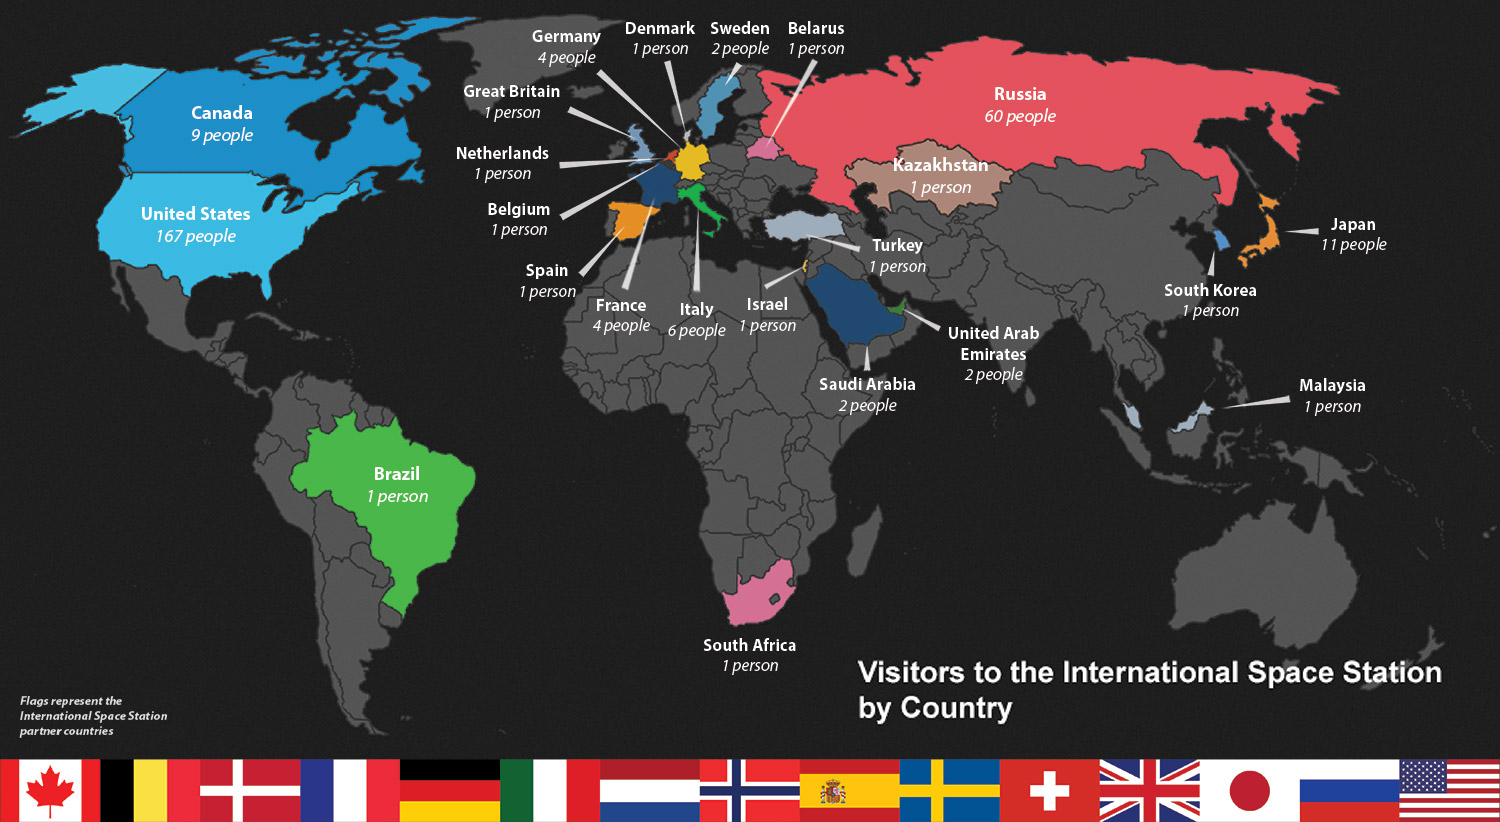 280 individuals from 22 countries have visited the International Space Station.